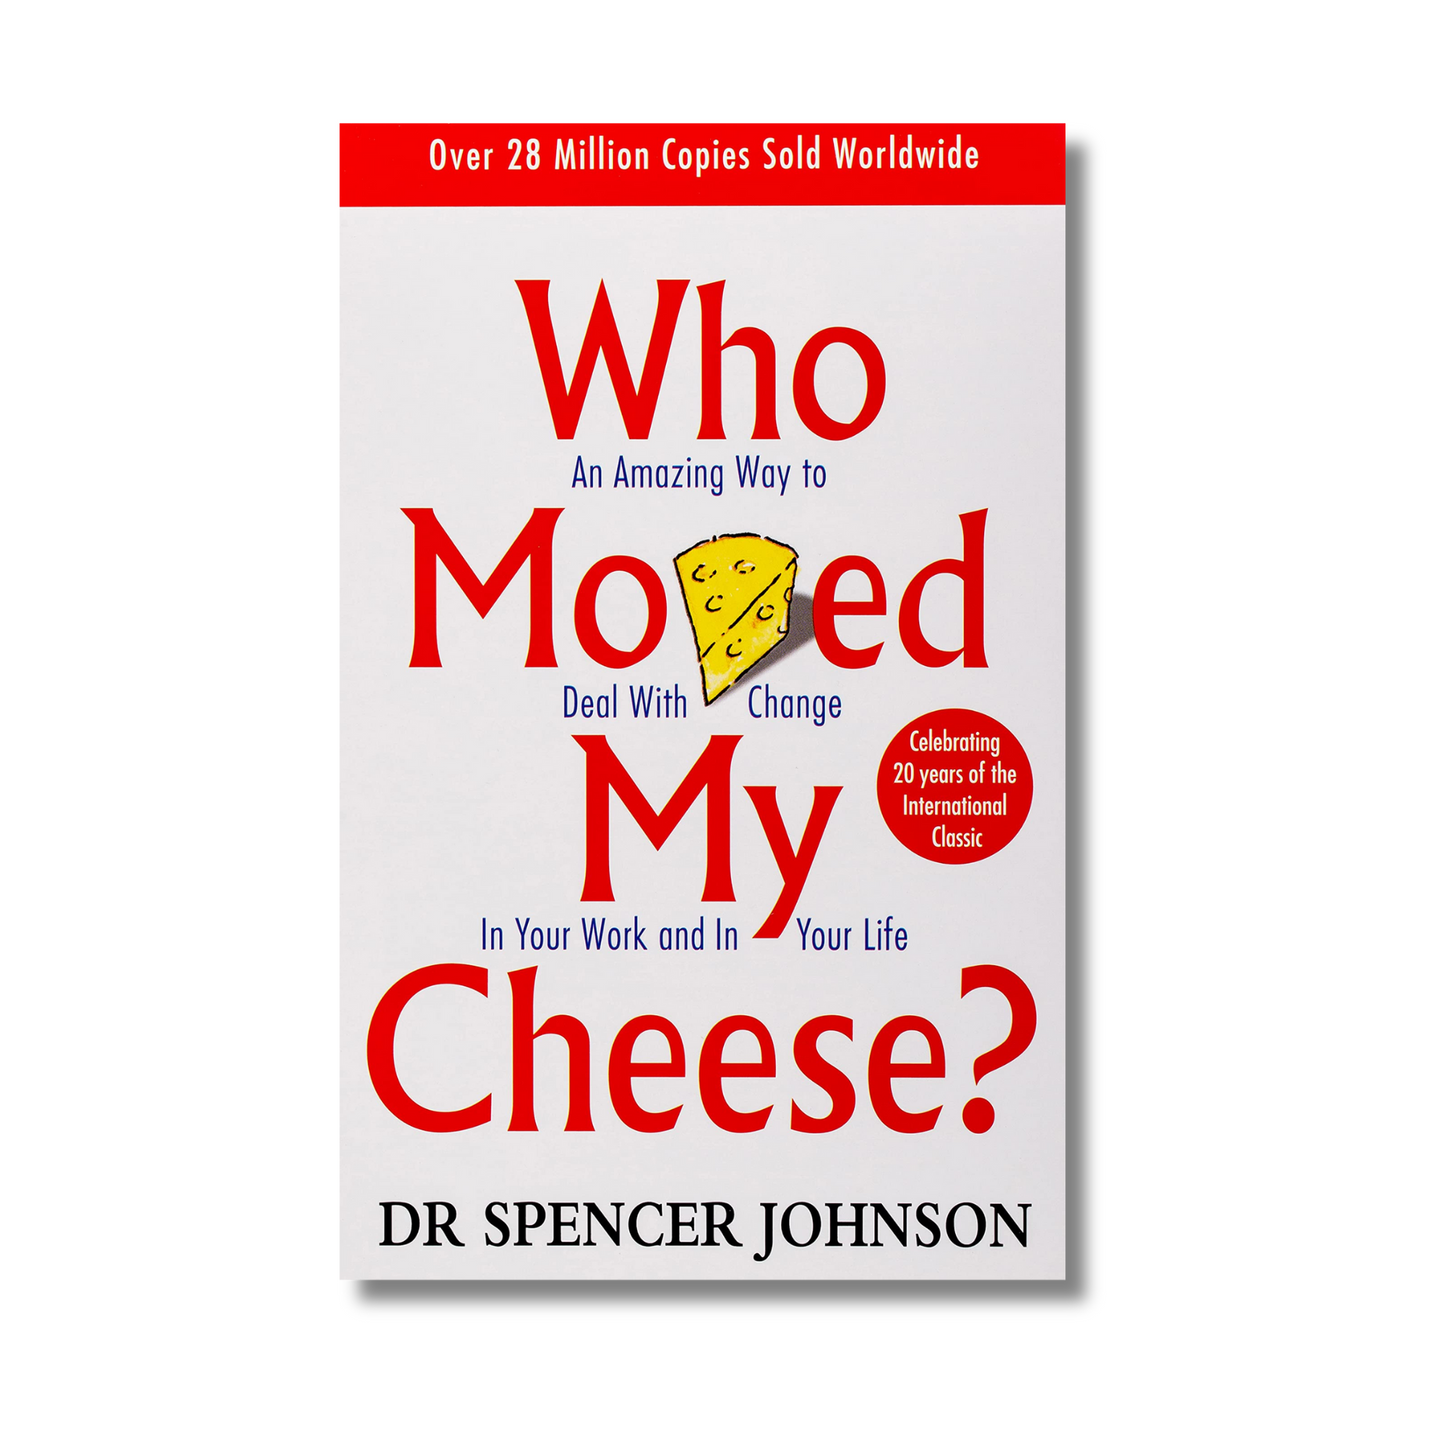 Who Moved My Cheese By dr spencer johnson (Paperback)